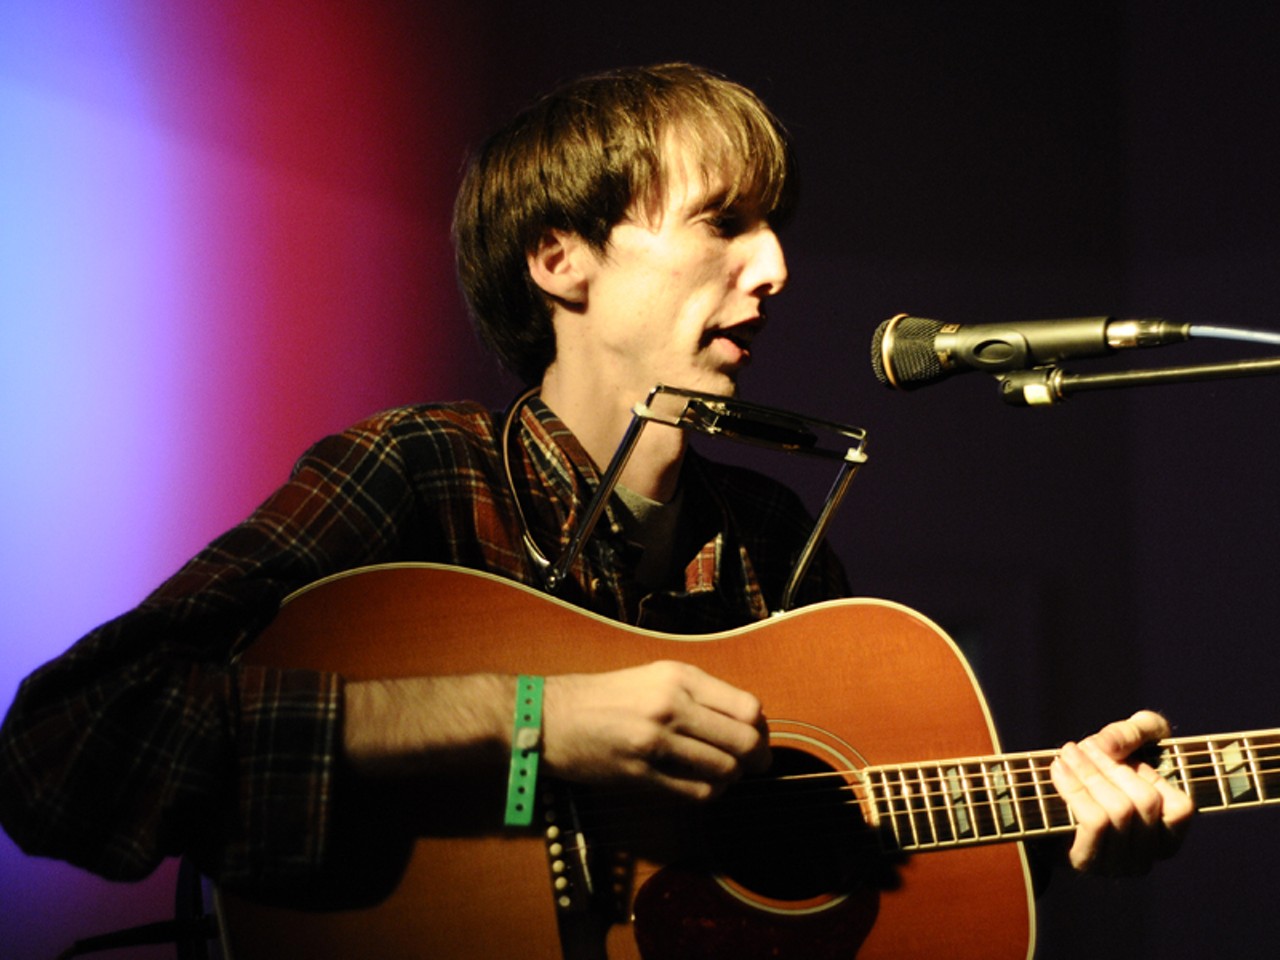 Bradford Cox of Deerhunter performs his solo material as the Atlas Sound.